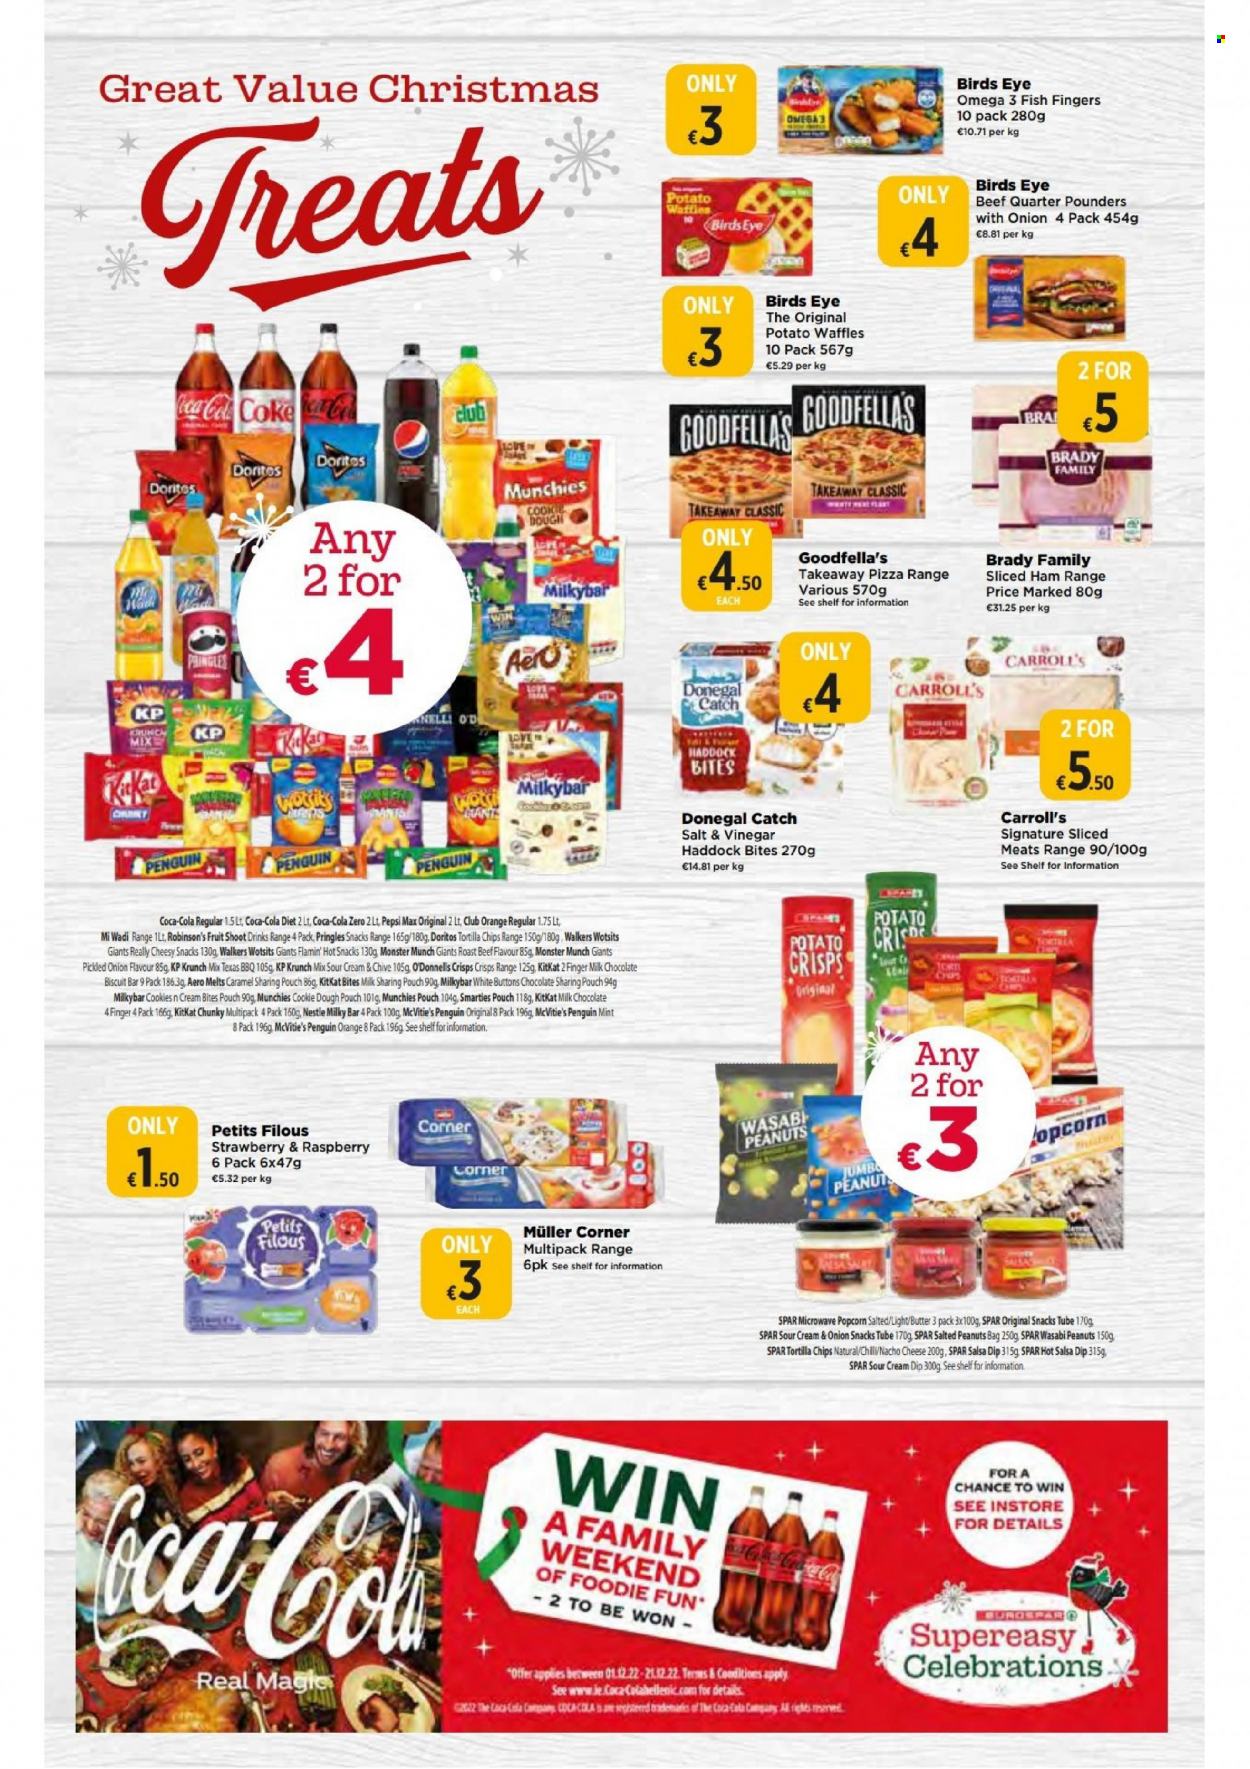 thumbnail - EUROSPAR offer  - 01.12.2022 - 28.12.2022 - Sales products - waffles, haddock, fish, fish fingers, fish sticks, pizza, Bird's Eye, ham, Müller, Petits Filous, butter, dip, Donegal Catch, cookie dough, cookies, milk chocolate, Nestlé, chocolate, snack, Smarties, KitKat, Celebration, Monster Munch, biscuit, milky bar, Doritos, tortilla chips, Pringles, chips, popcorn, wasabi, caramel, salsa, peanuts, Coca-Cola, Pepsi, Monster, Pepsi Max, Coca-Cola zero, beef meat, roast beef, Omega-3. Page 17.